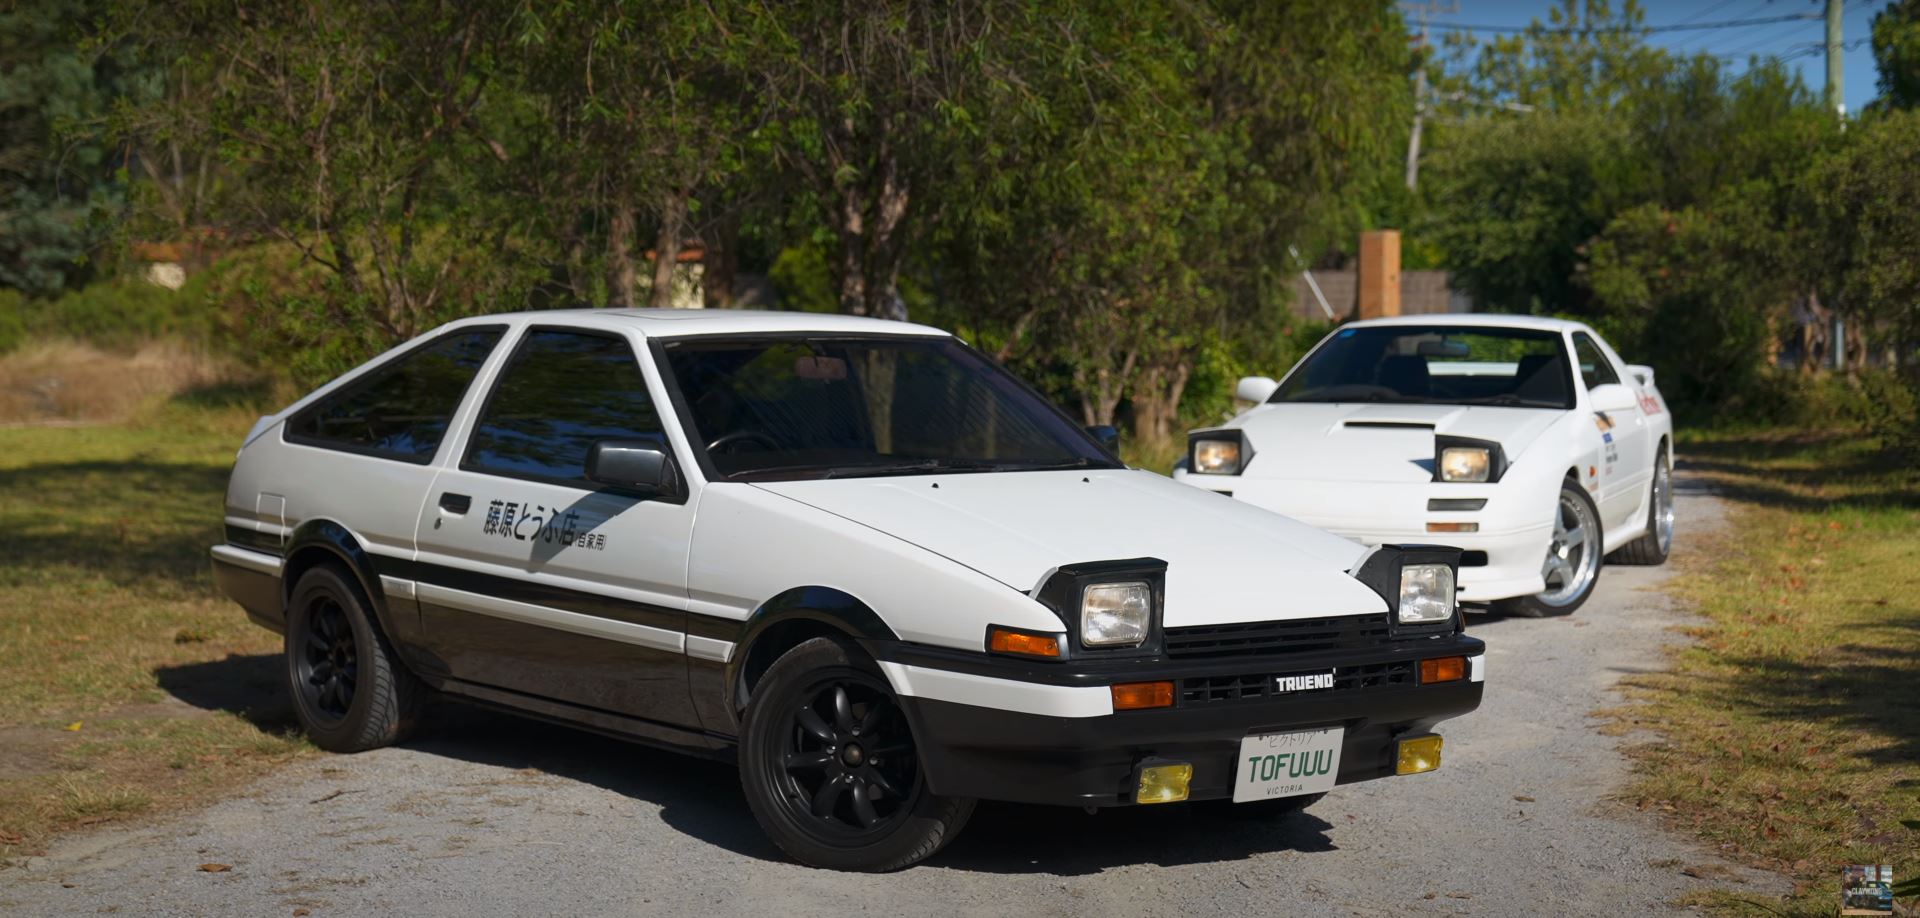 https://s1.cdn.autoevolution.com/images/news/gallery/from-initial-d-to-real-life-aussie-man-drives-toyota-corolla-ae86-and-mazda-rx7_32.jpg